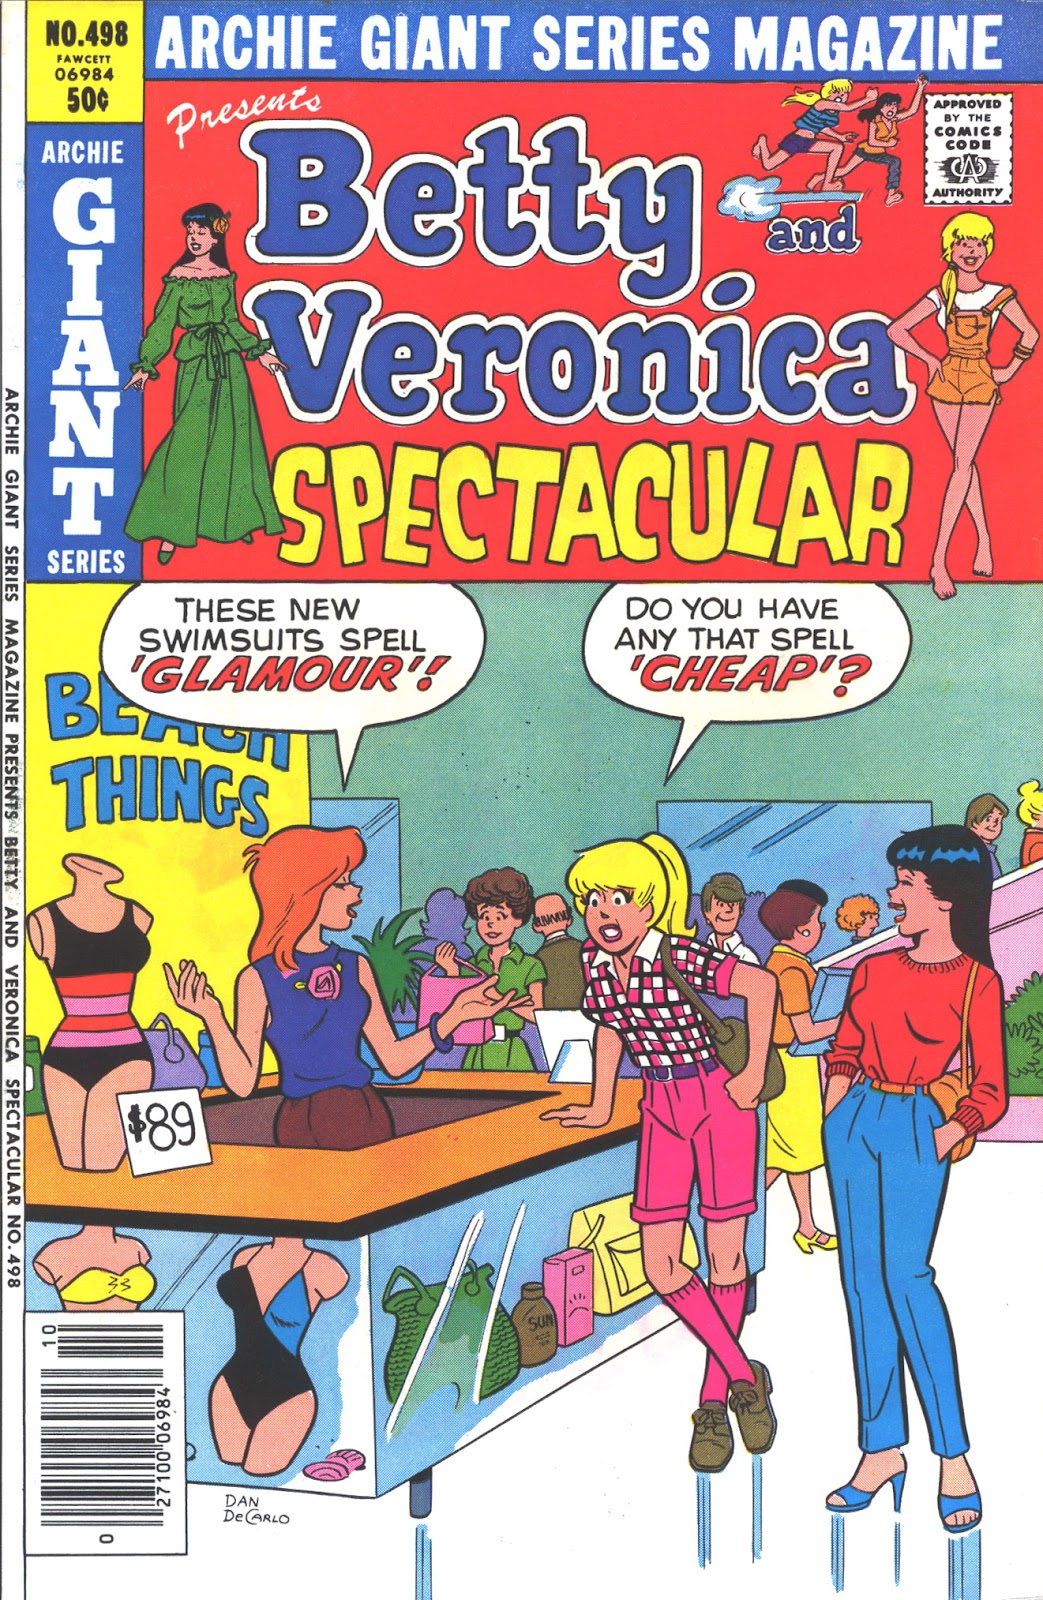 Archie Giant Series Magazine 498 Page 1